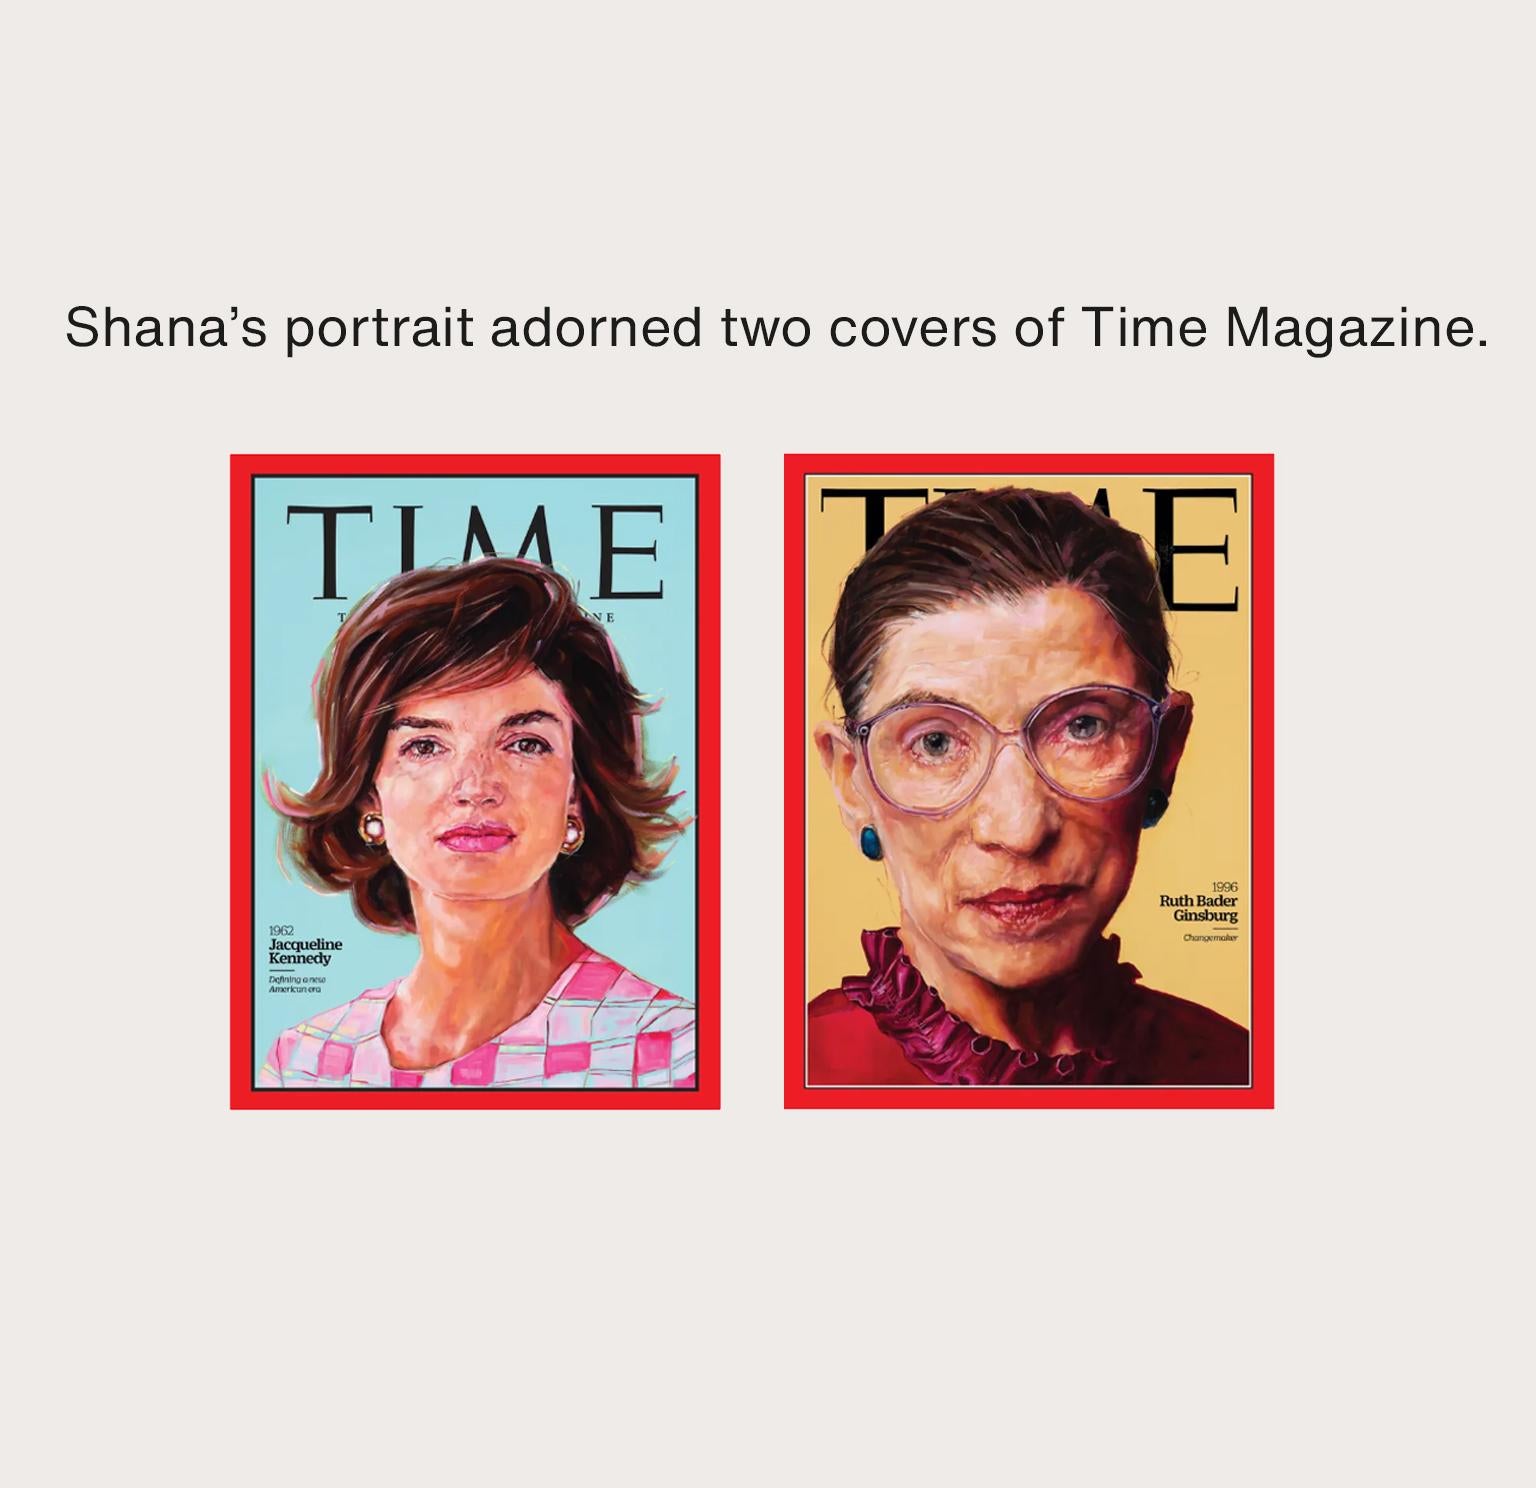 Shana’s portraits adorned two covers of Time Magazine.
 
Shana’s work is about the face and eyes. Young face, old face, black or white. Her subjects are confused, lonely, ragged and desolate. Once we finish scrutinizing the powerful images, we